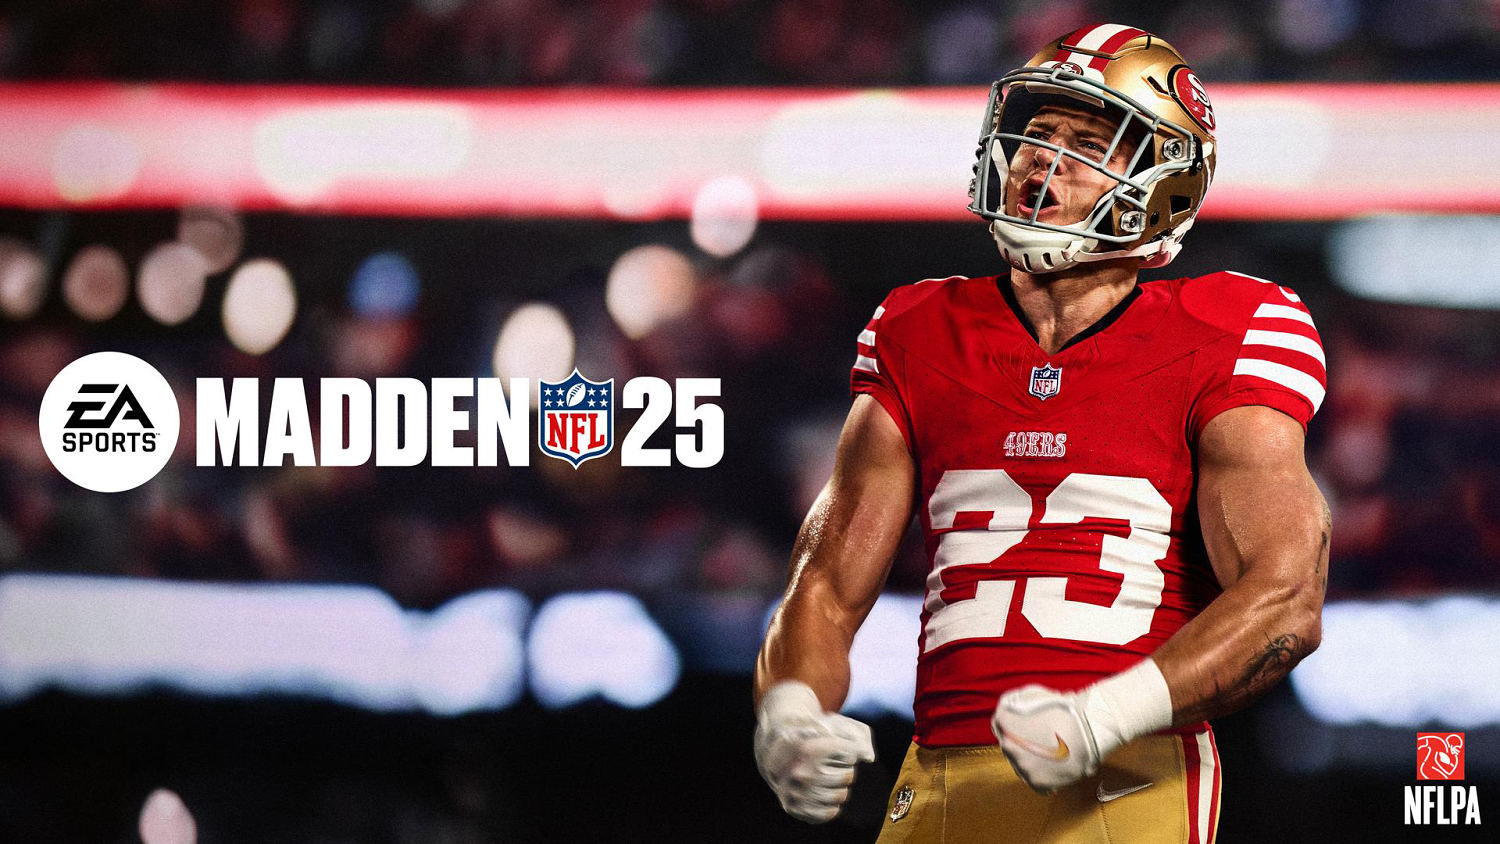 49ers’ Christian McCaffrey unveiled as cover star for Madden 25 video game